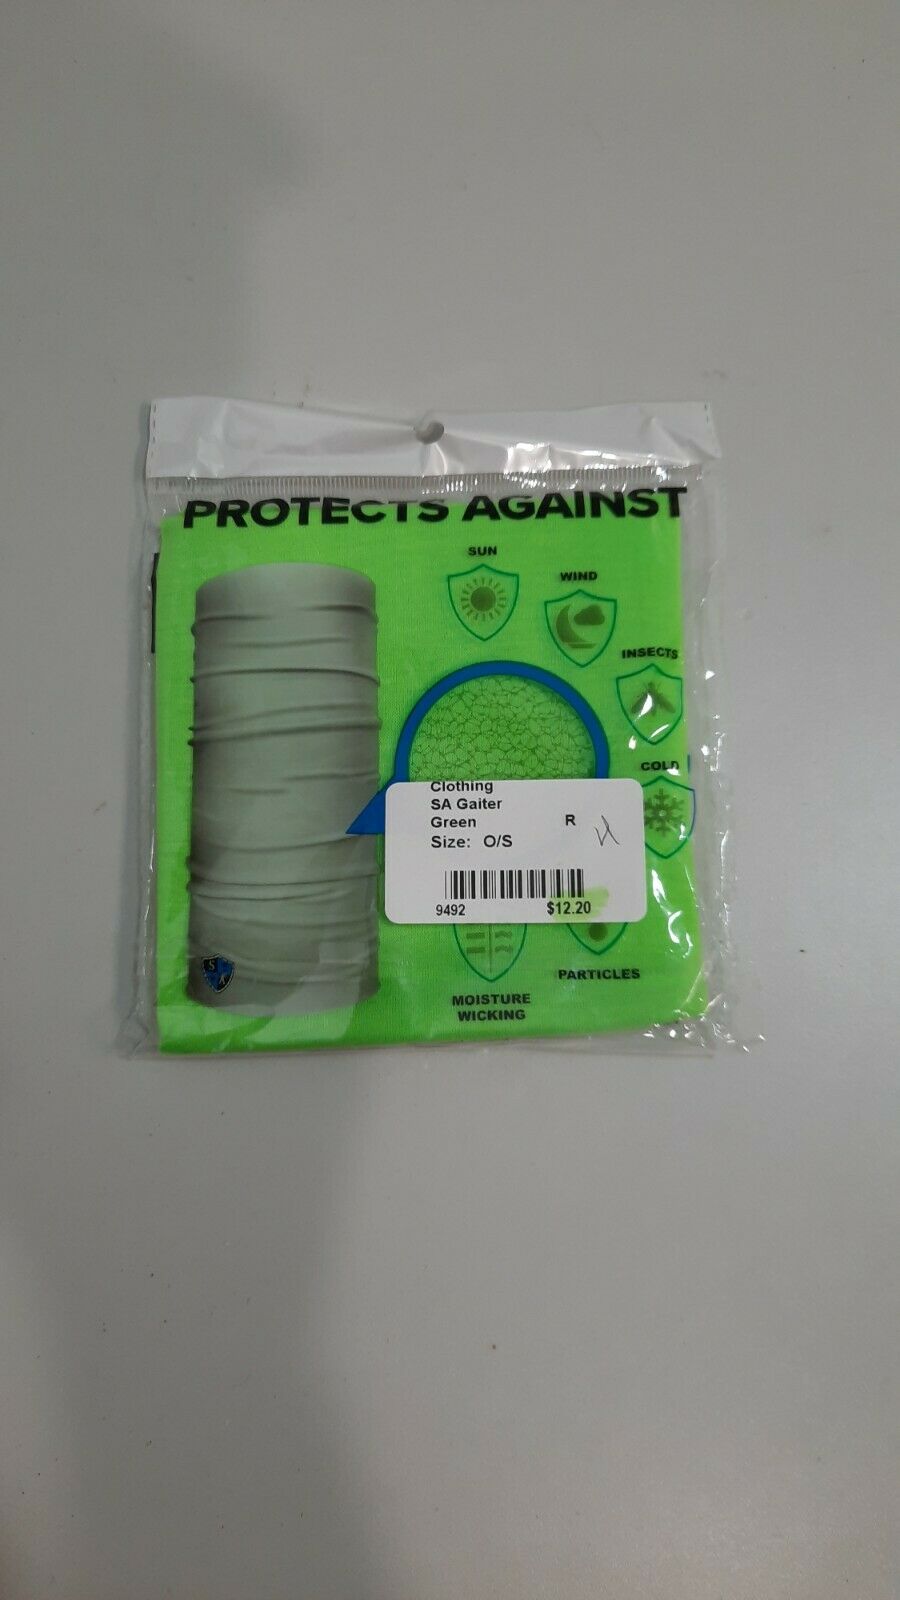 SA Co. Face shield protects Against Sun wind insects cold particles one size...